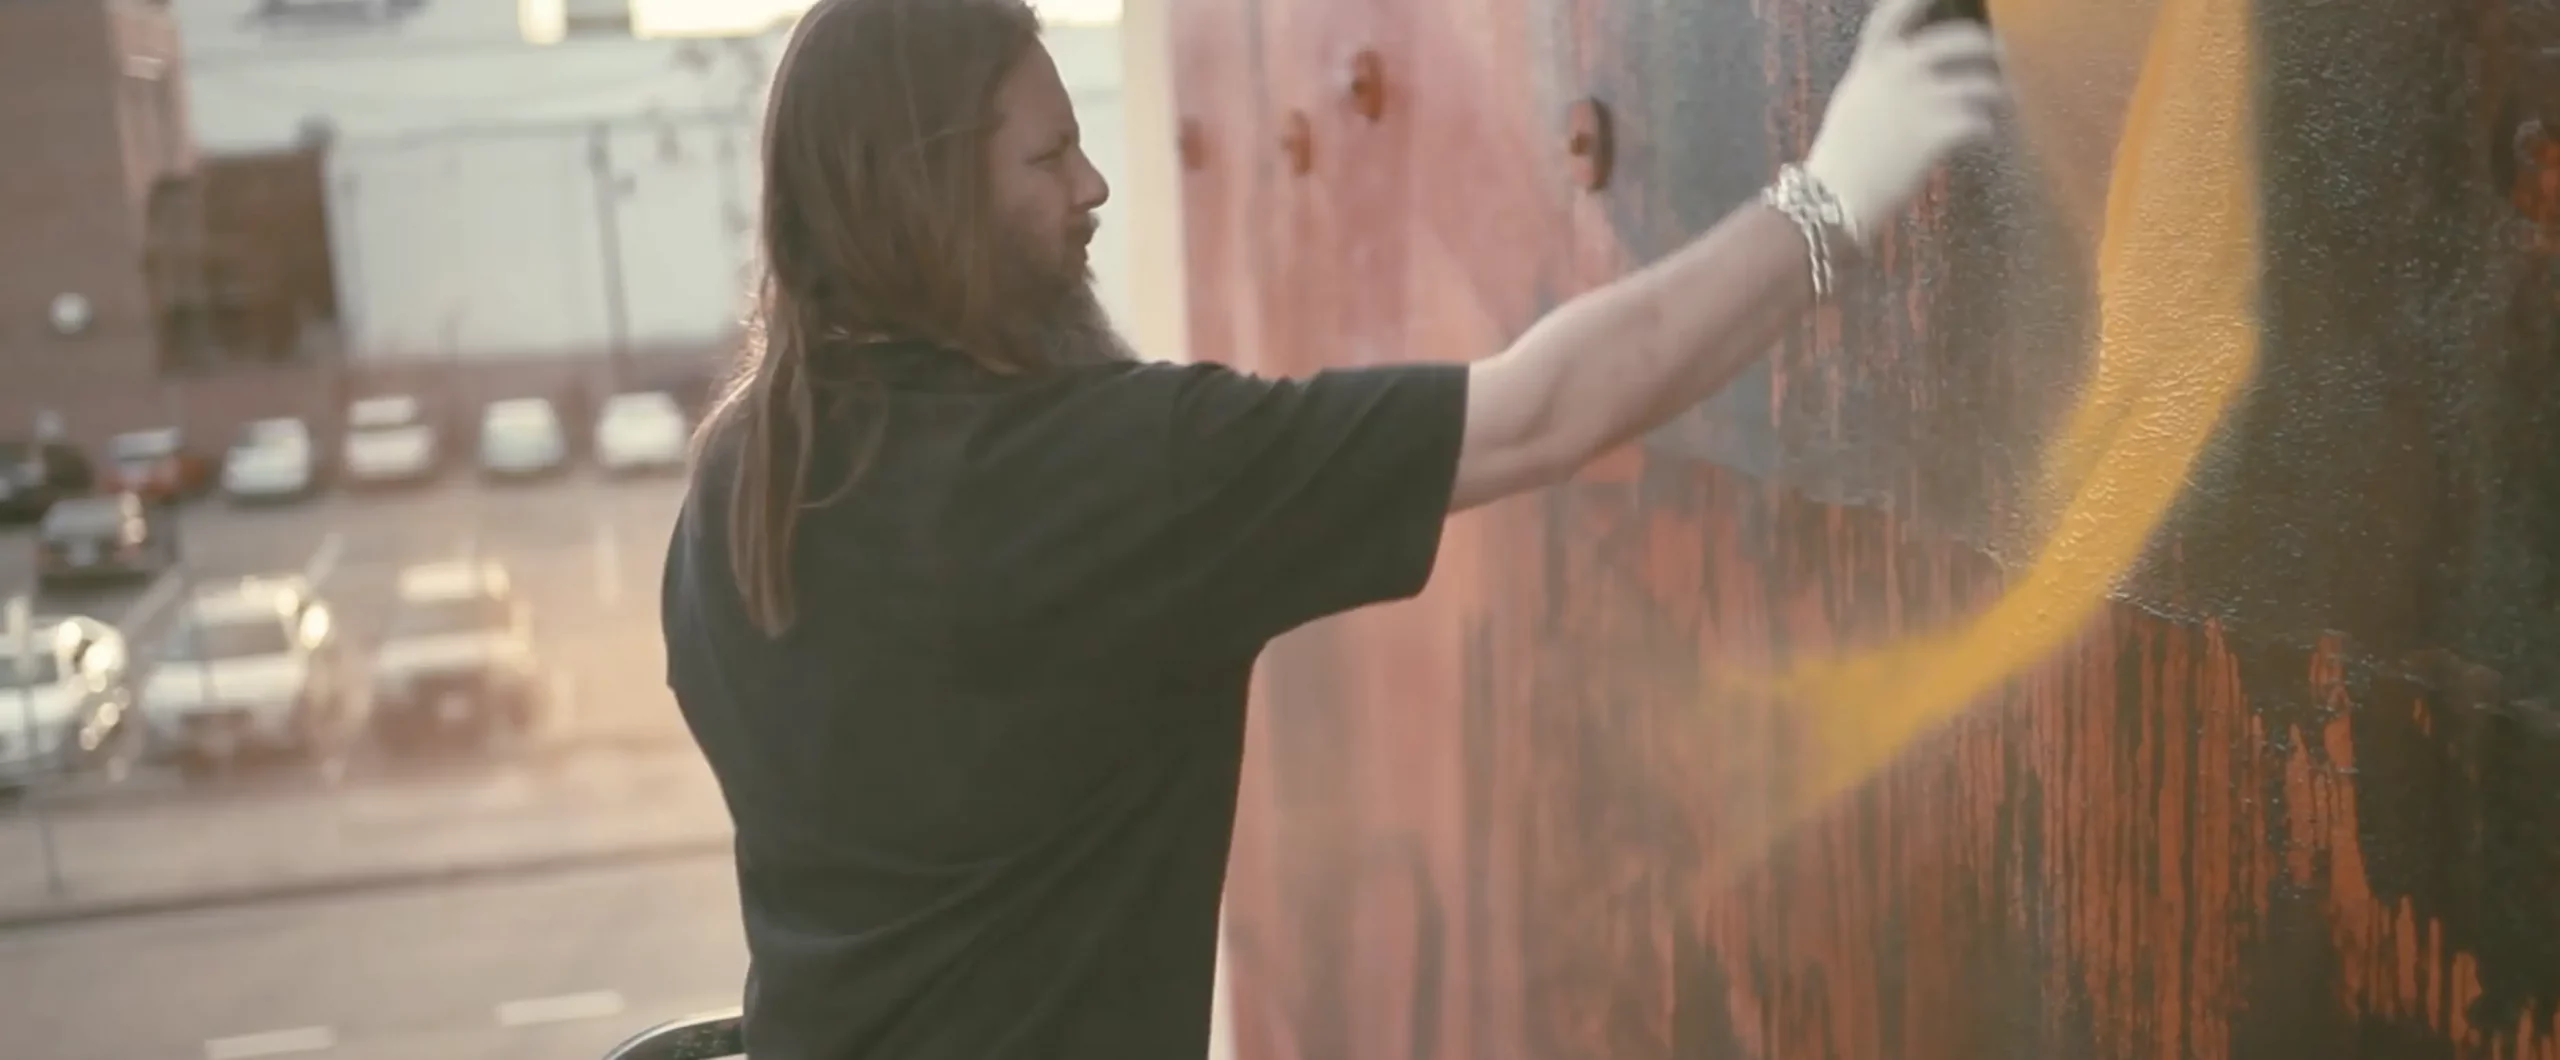 A person wearing gloves and spray painting a wall in Dallas, Texas. The person is being filmed by a branded documentary production company.